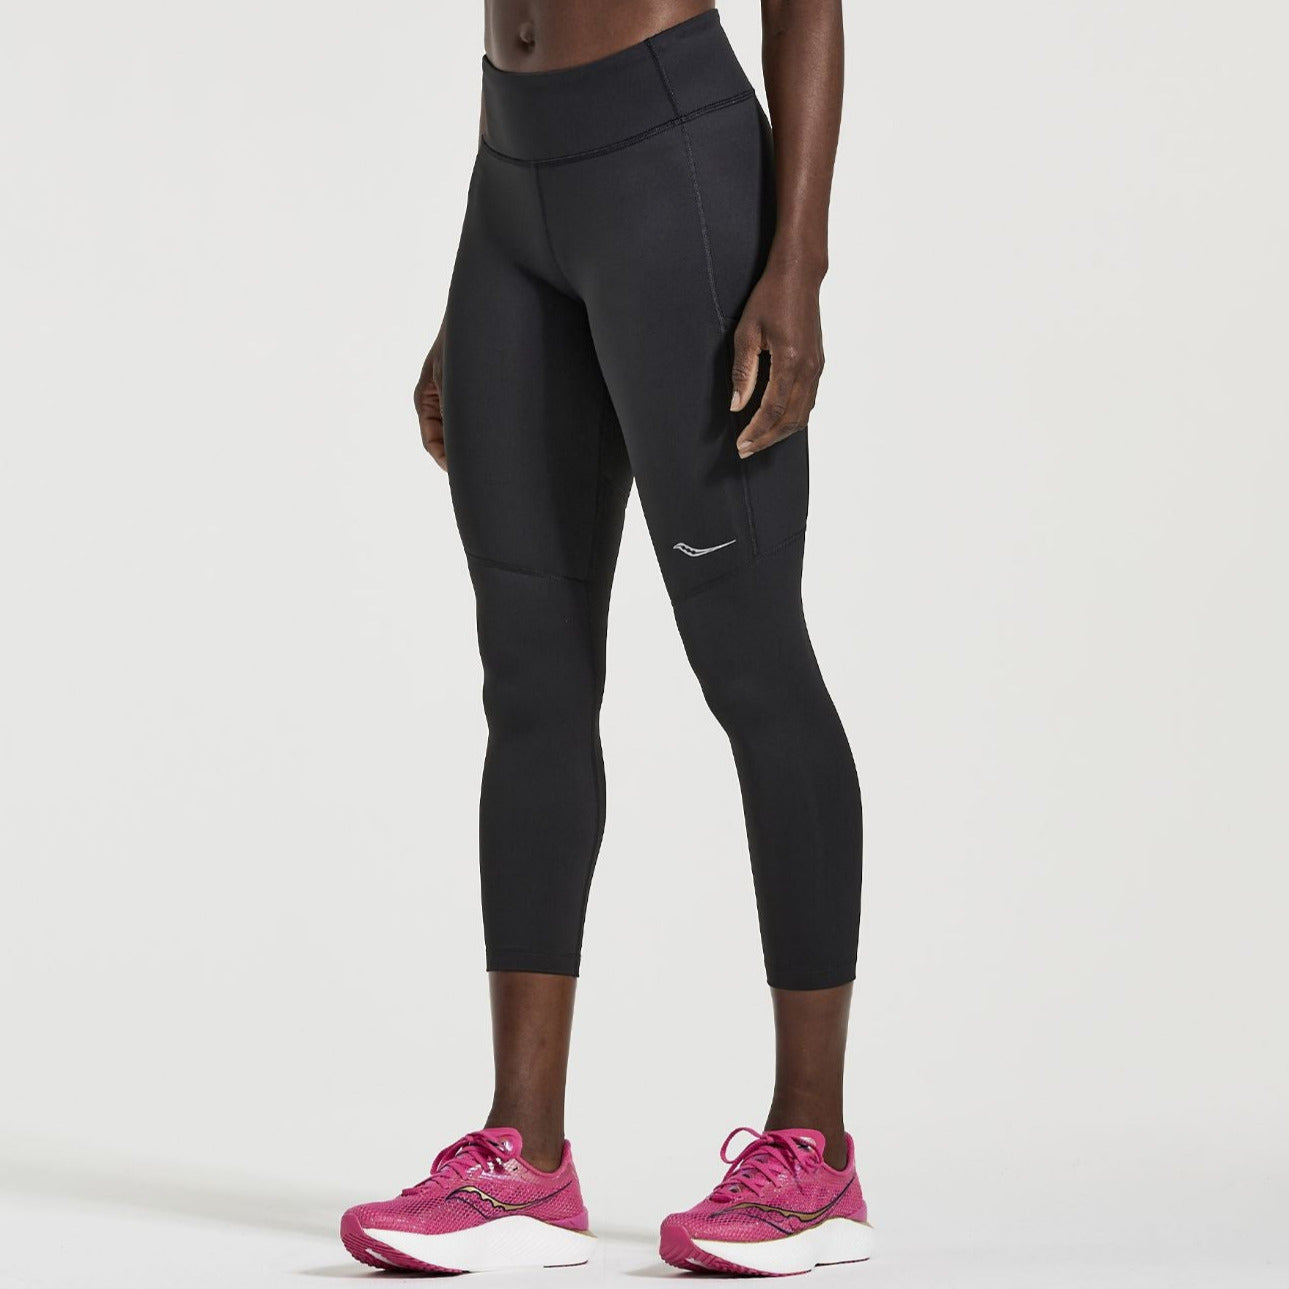 Saucony Women's Fortify Crop Tight Running Pant